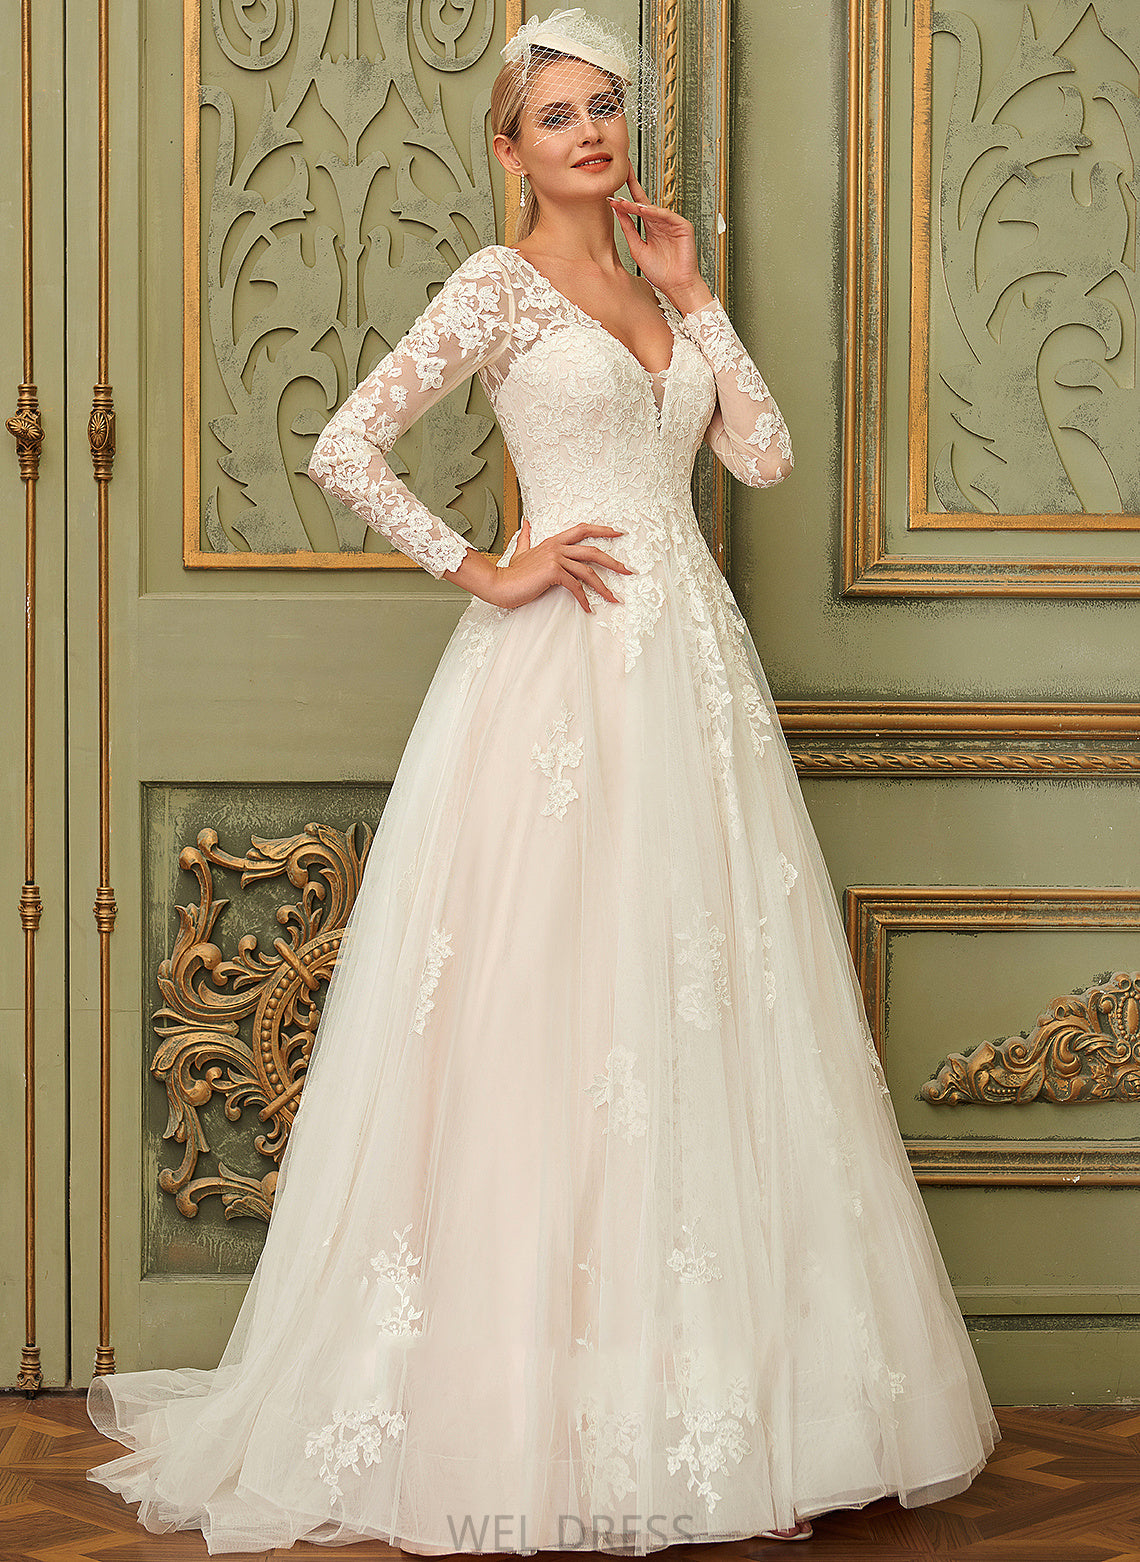 Lace Dress Ball-Gown/Princess Tulle Wedding V-neck Train Sweep Shirley Wedding Dresses